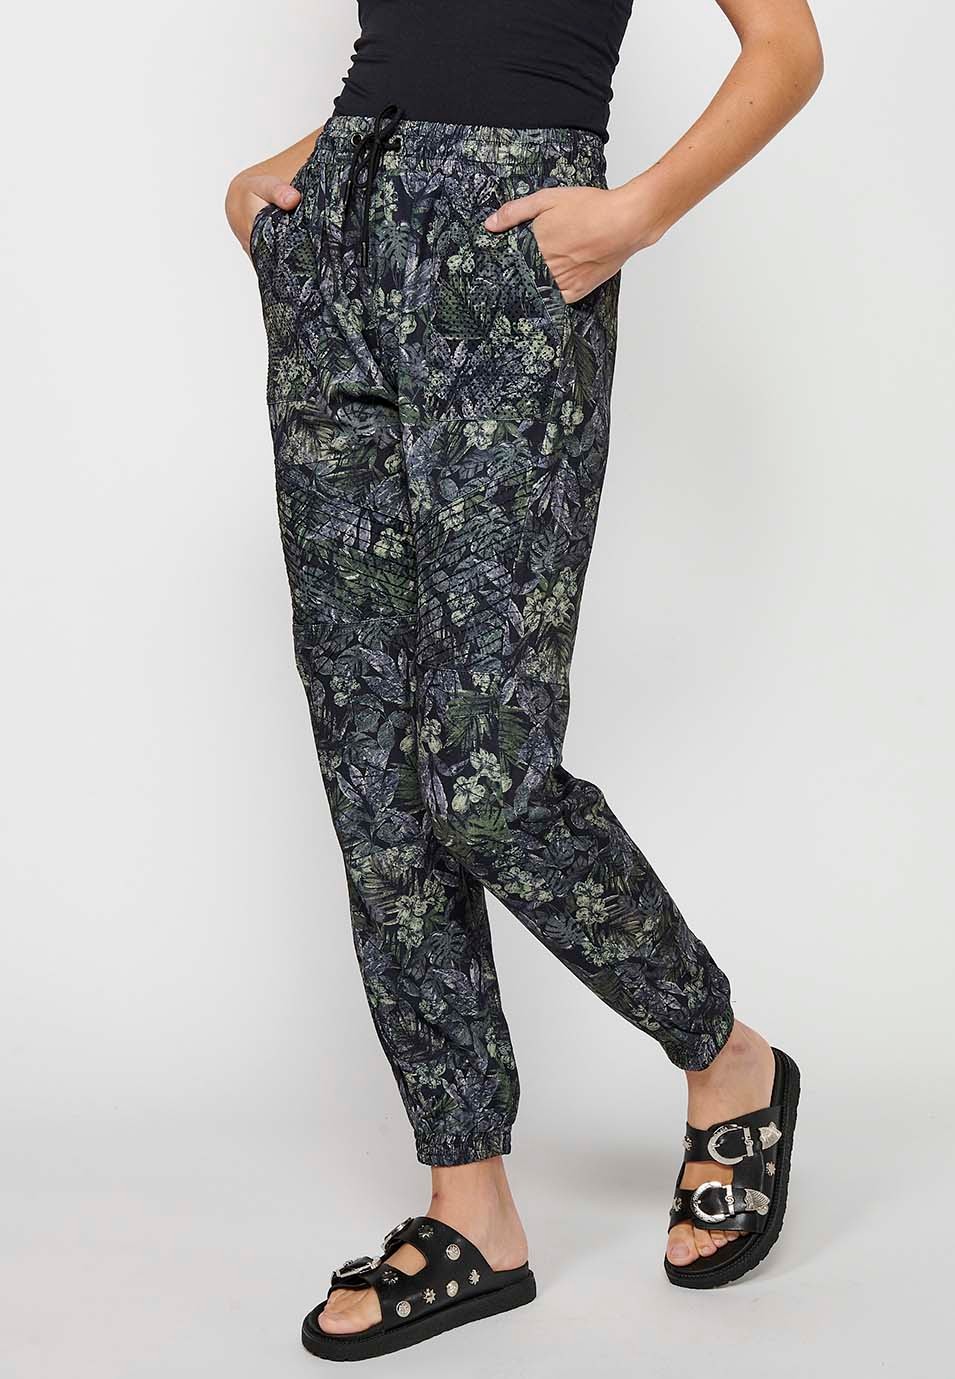 Long jogging pants fitted at the ankles with elasticated waistband with drawstring and Khaki floral print for Women 1